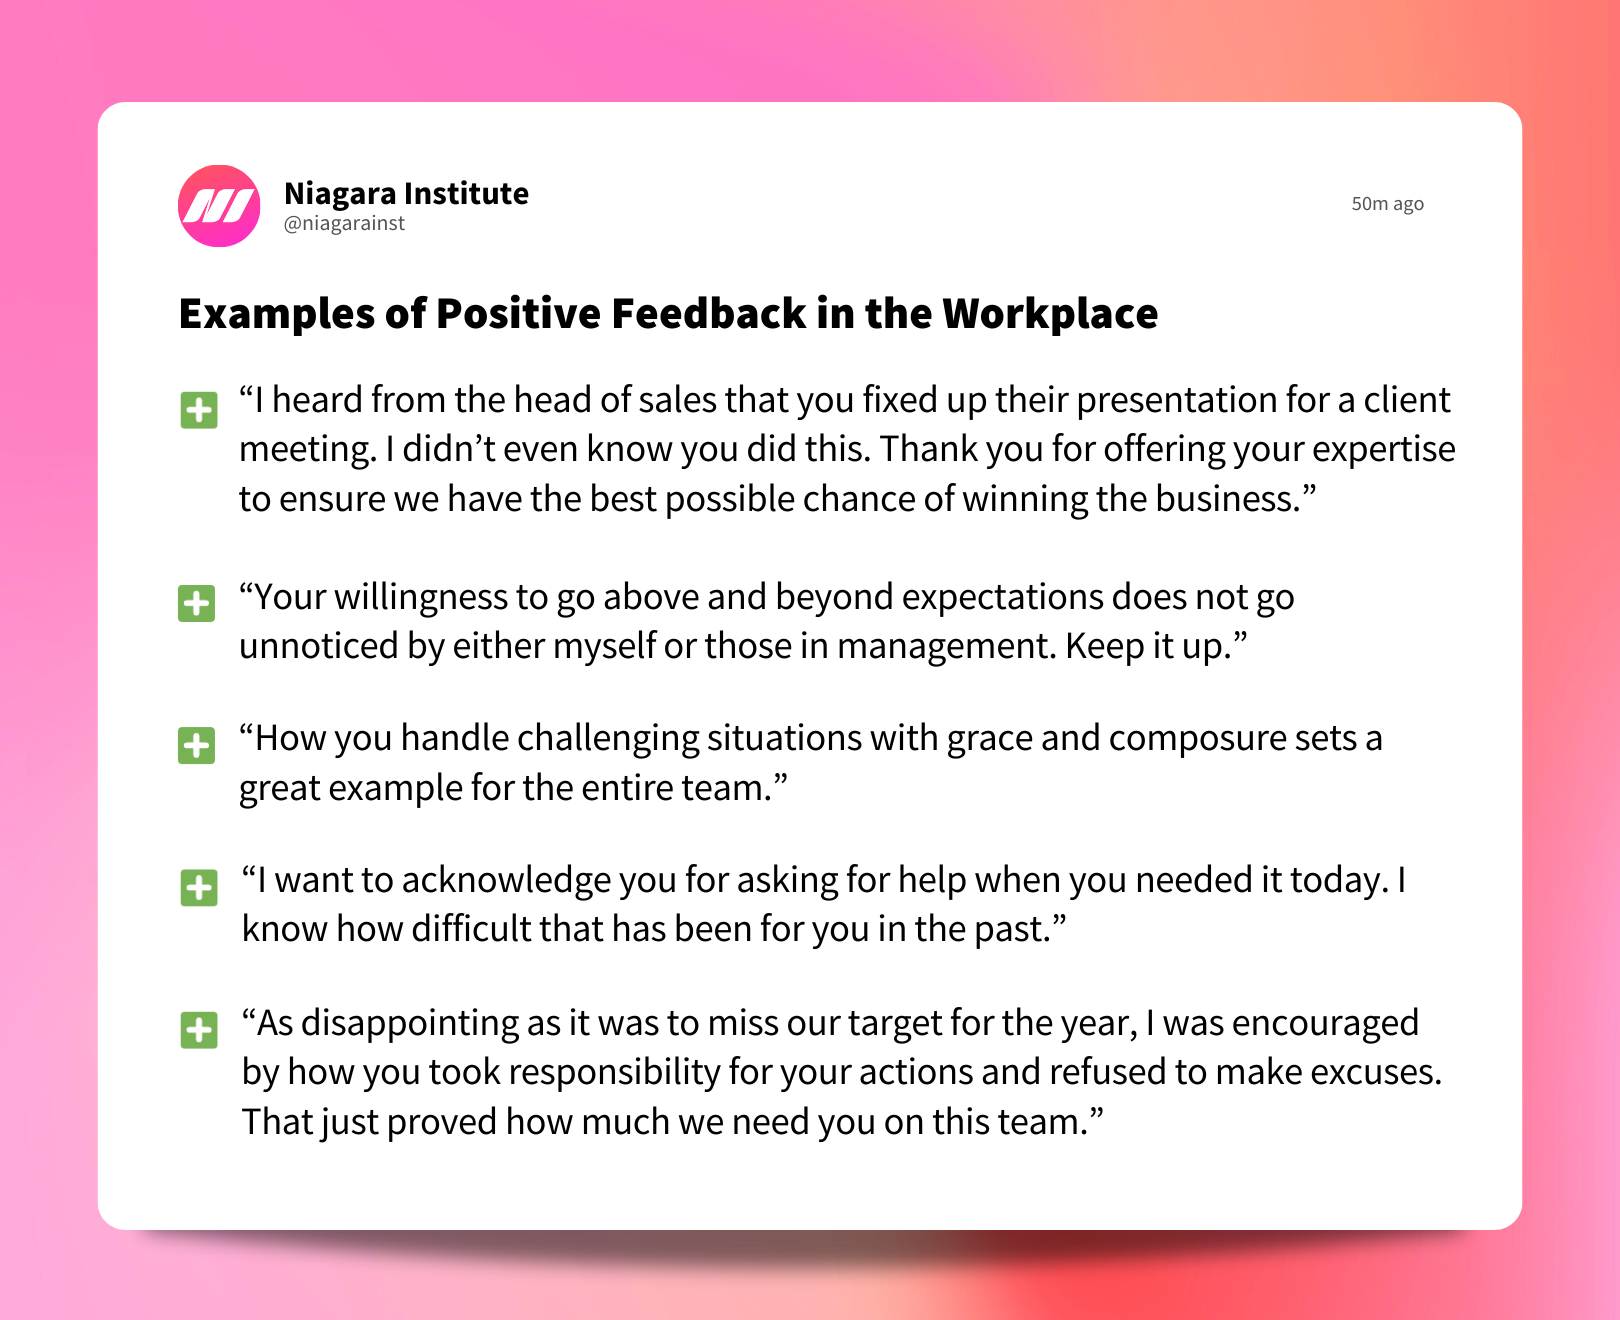 Examples of Positive Feedback in the Workplace - Niagara Institute